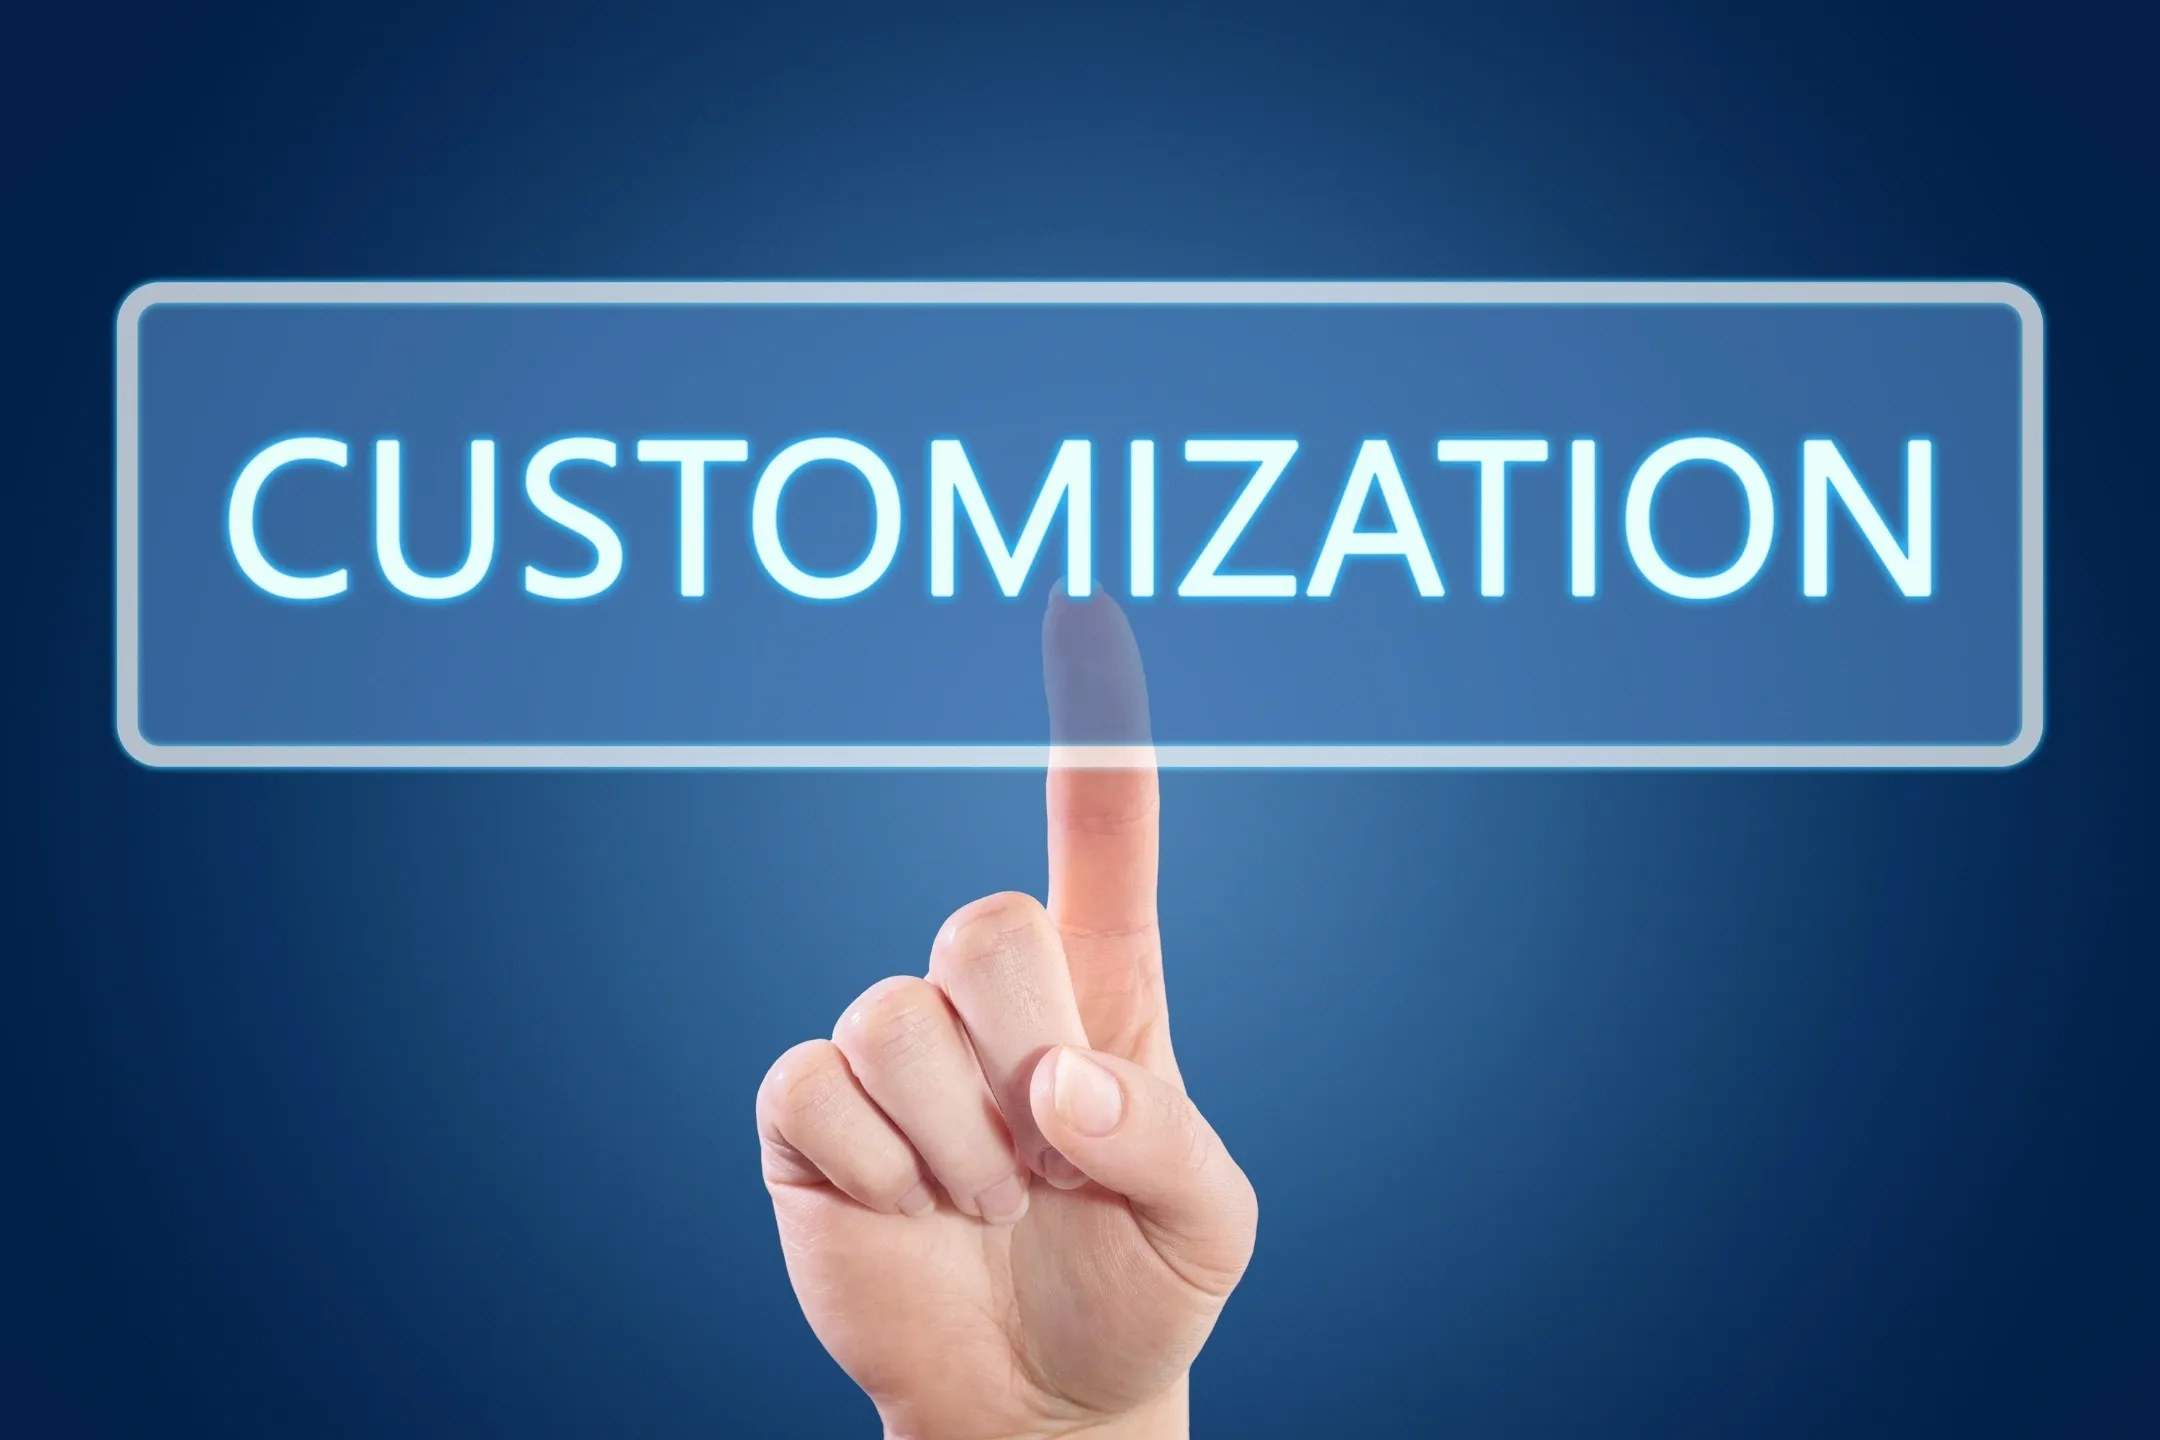 Cost effective and easy customization are baked in